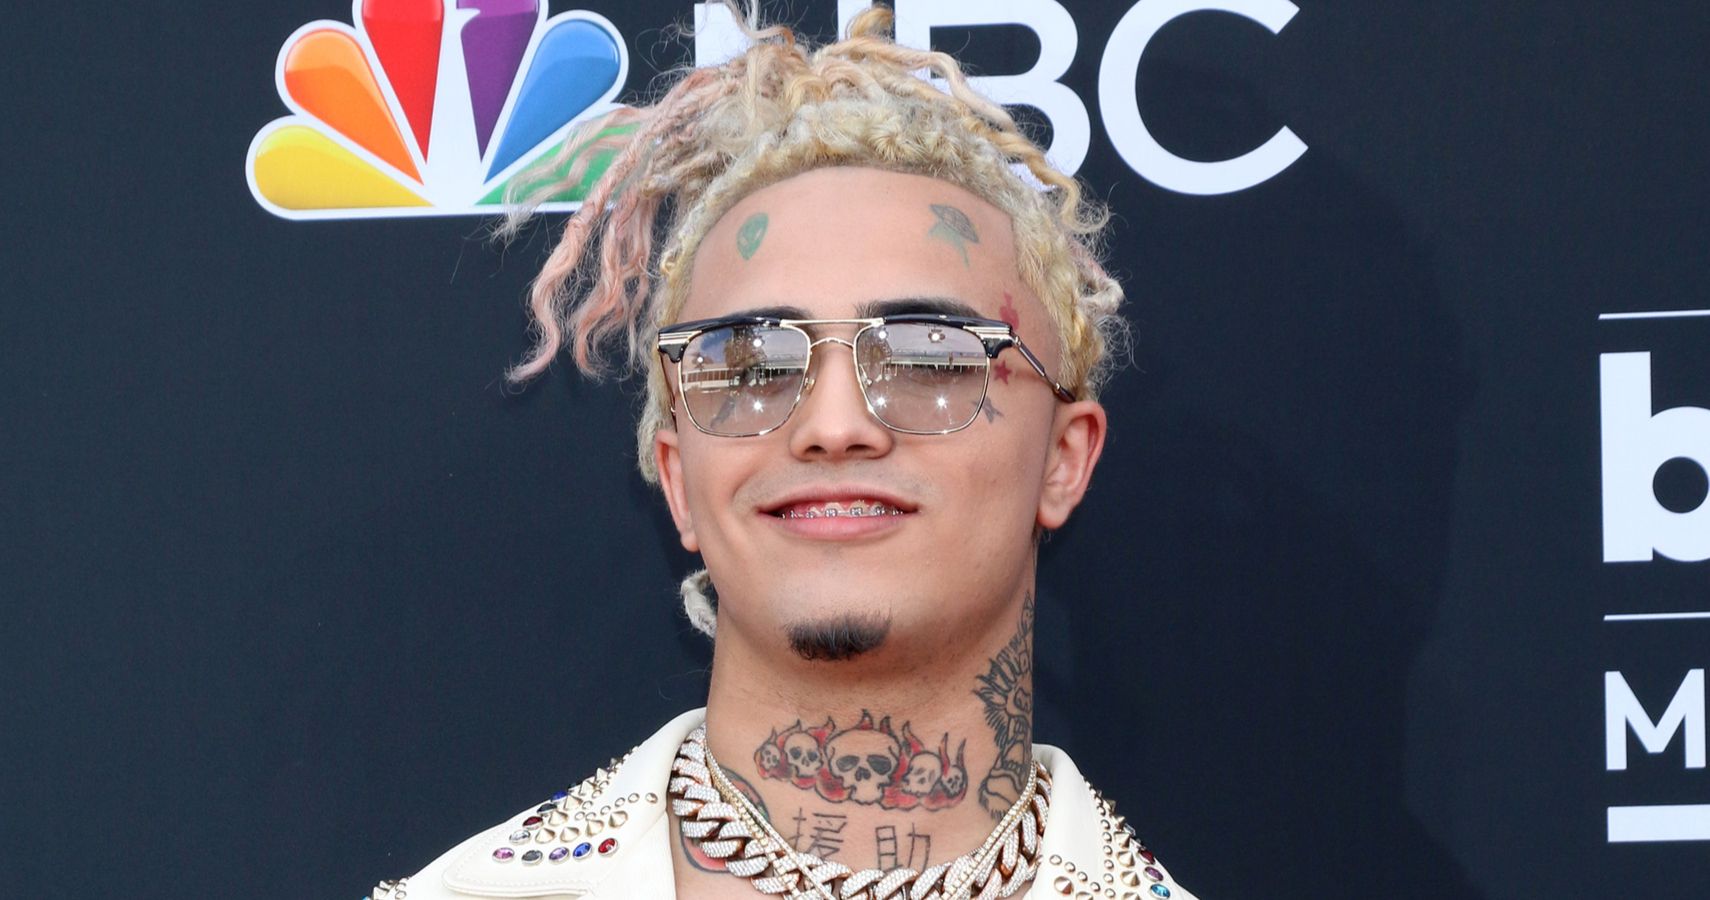 'Gucci Gang' Rapper Lil Pump Slapped With A Tax Lien After Failing To Pay $1.6 Million